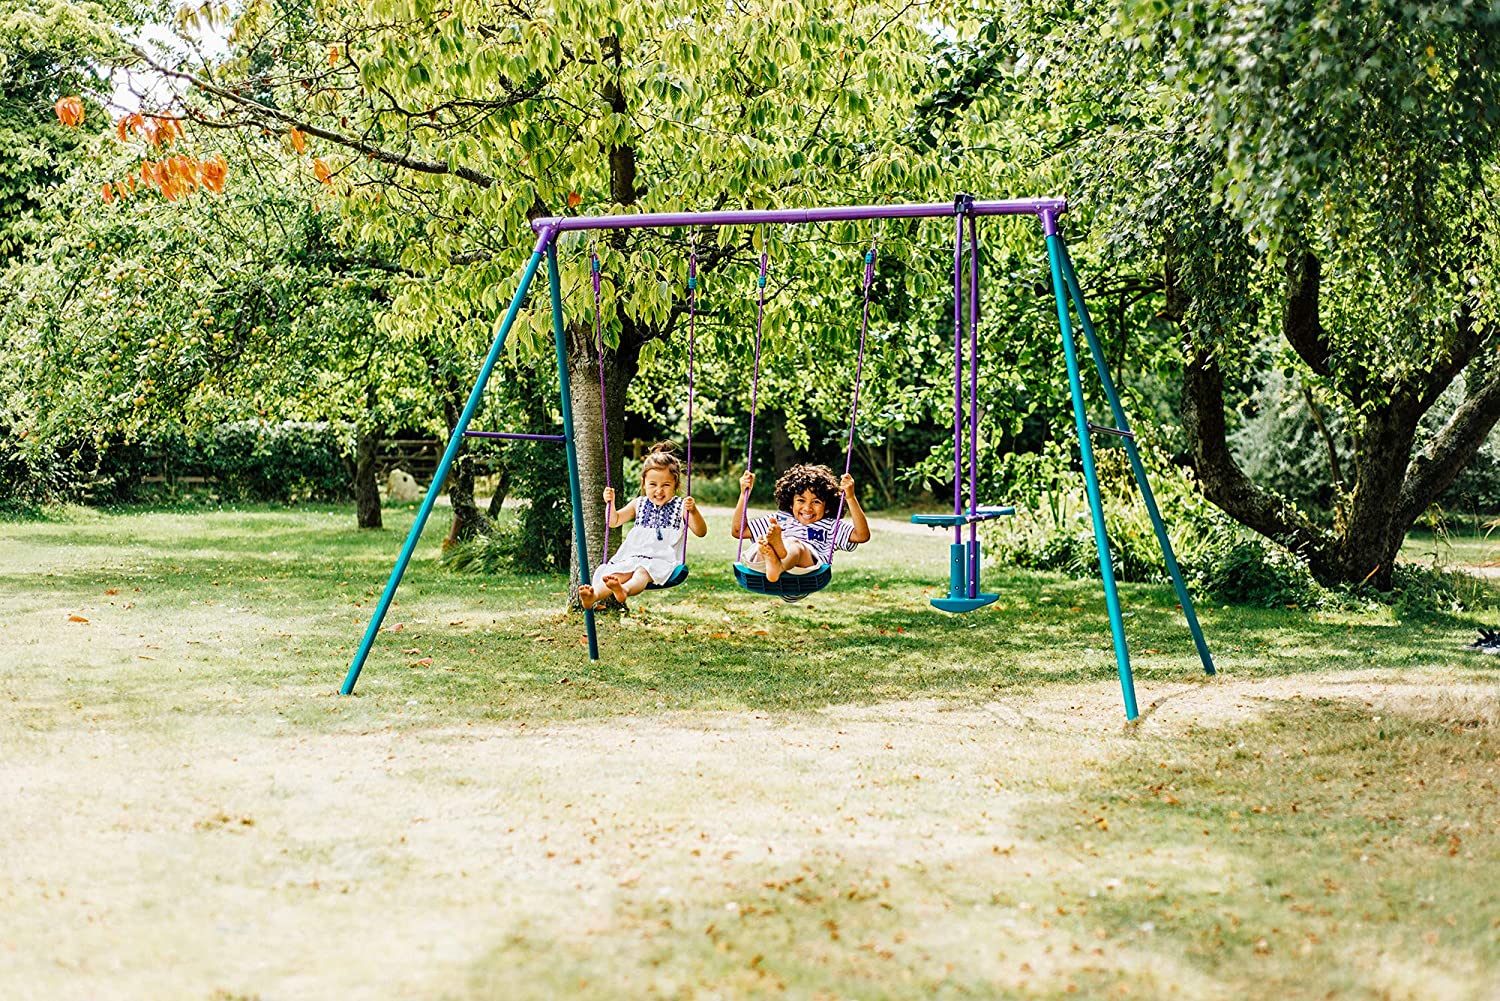 Plum Metal Jupiter Double Swing and Glider Set for Kids Ages 3-10 Years